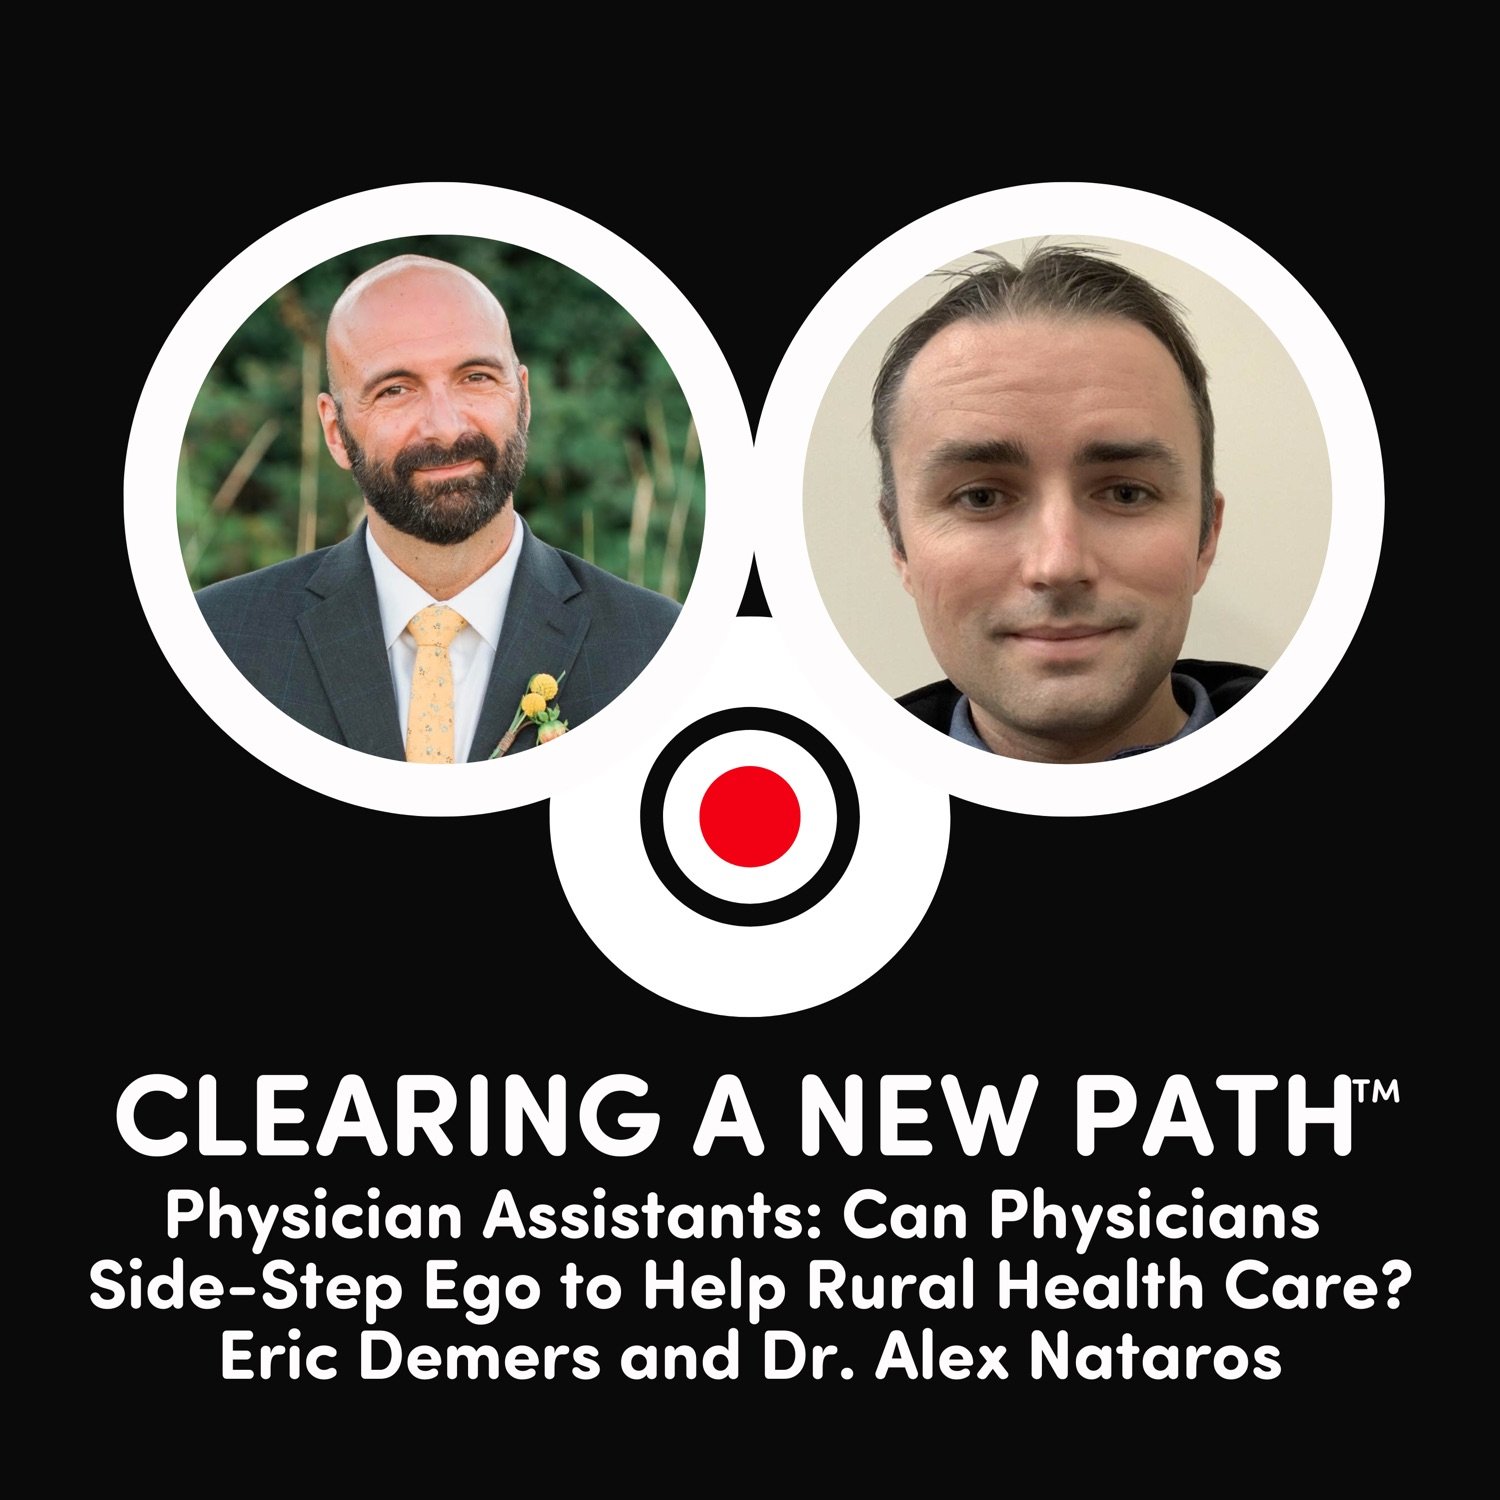 Physician Assistants: Can Physicians Side-Step Ego to Help Rural Health Care? Eric Demers and Dr. Alex Nataros